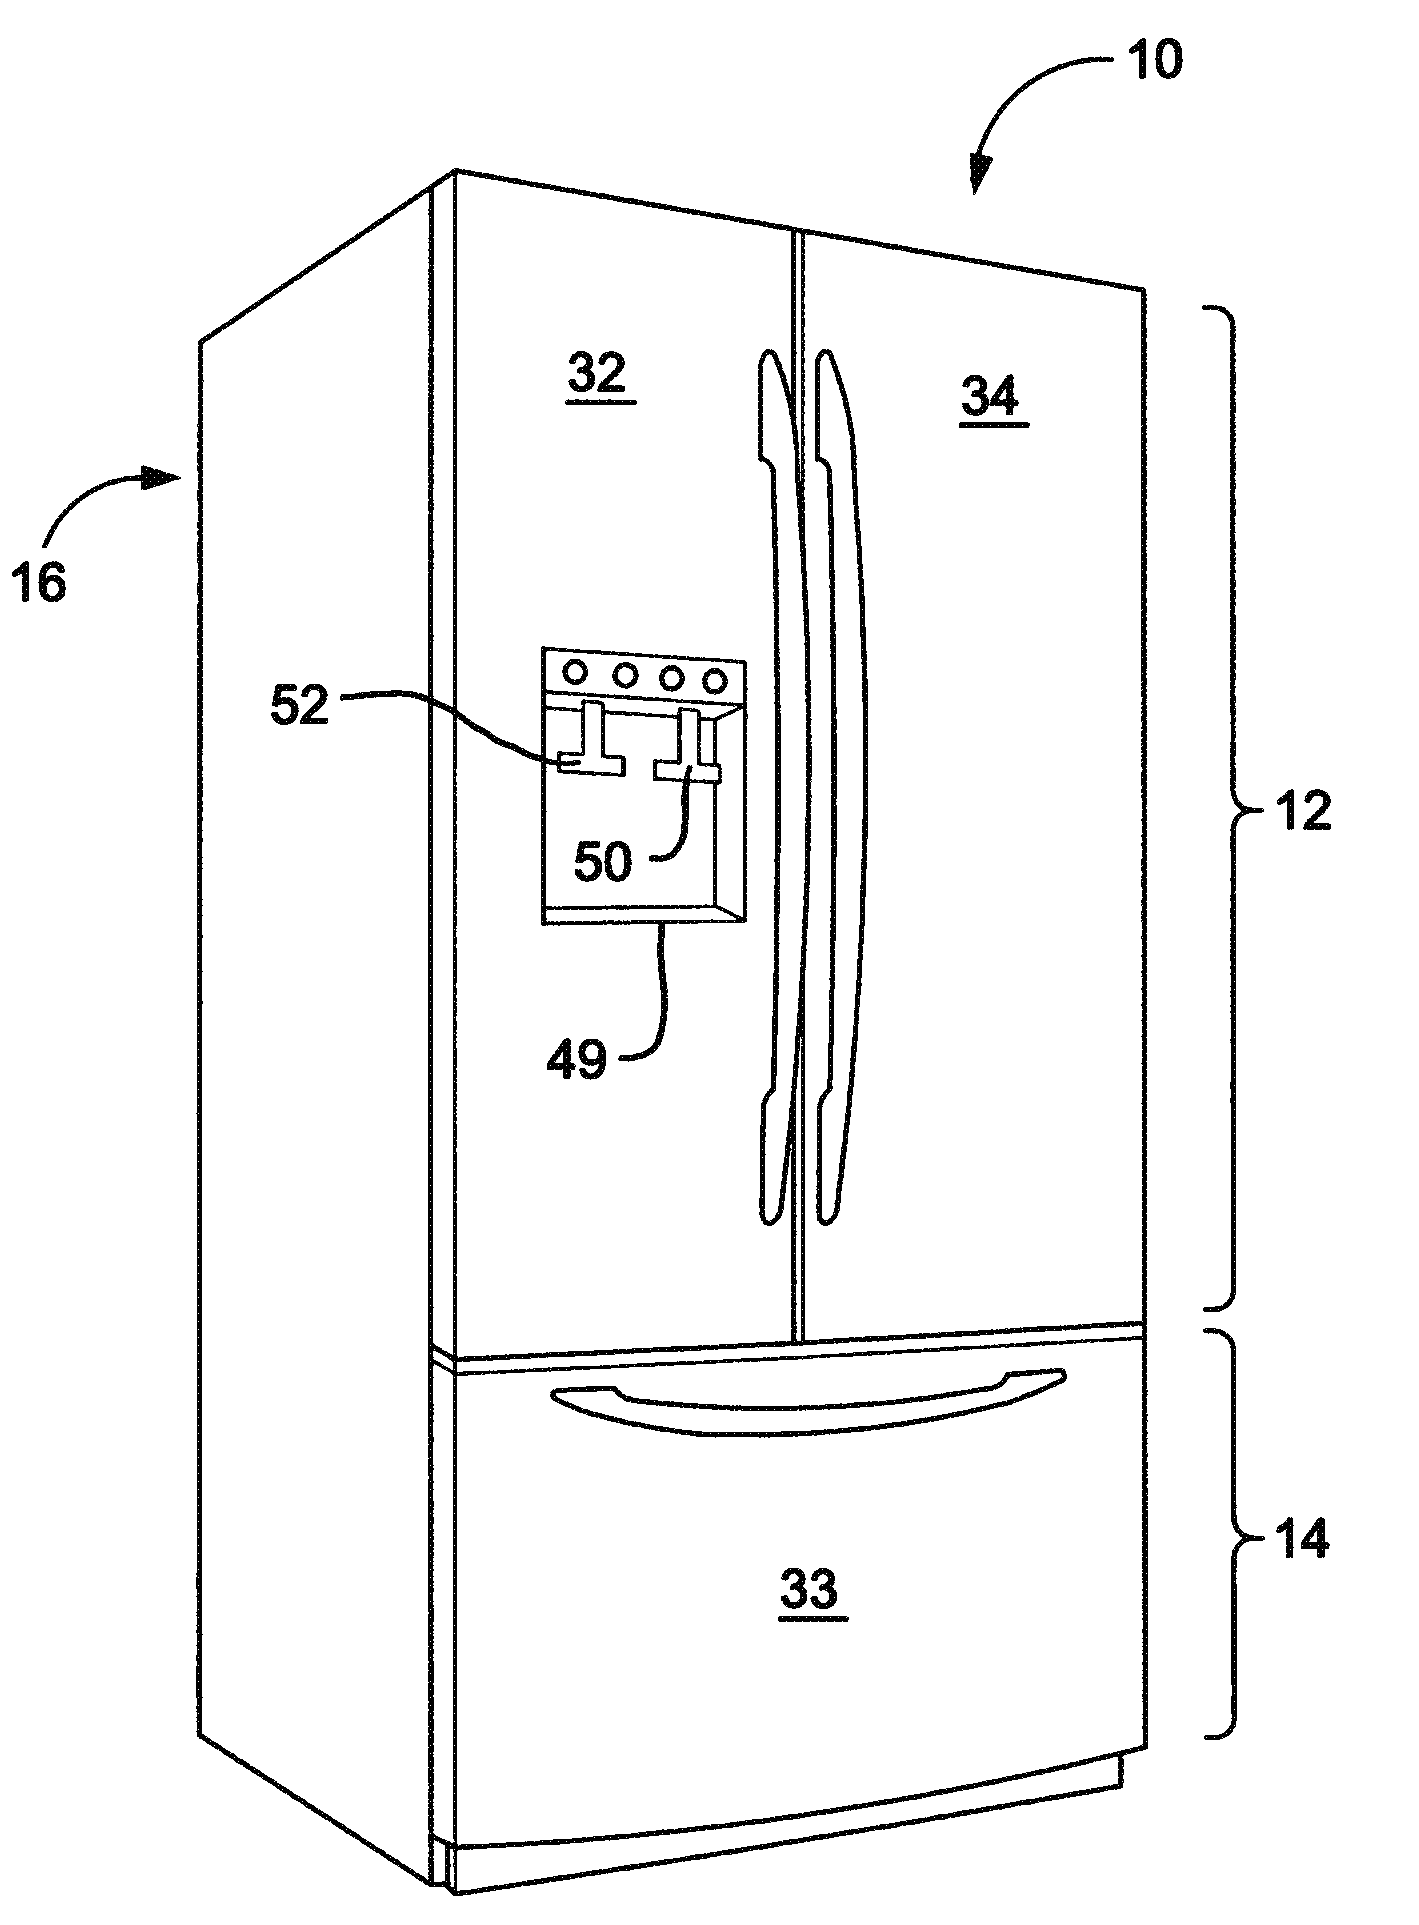 Method and apparatus for controlling temperature for forming ice within an icemaker compartment of a refrigerator